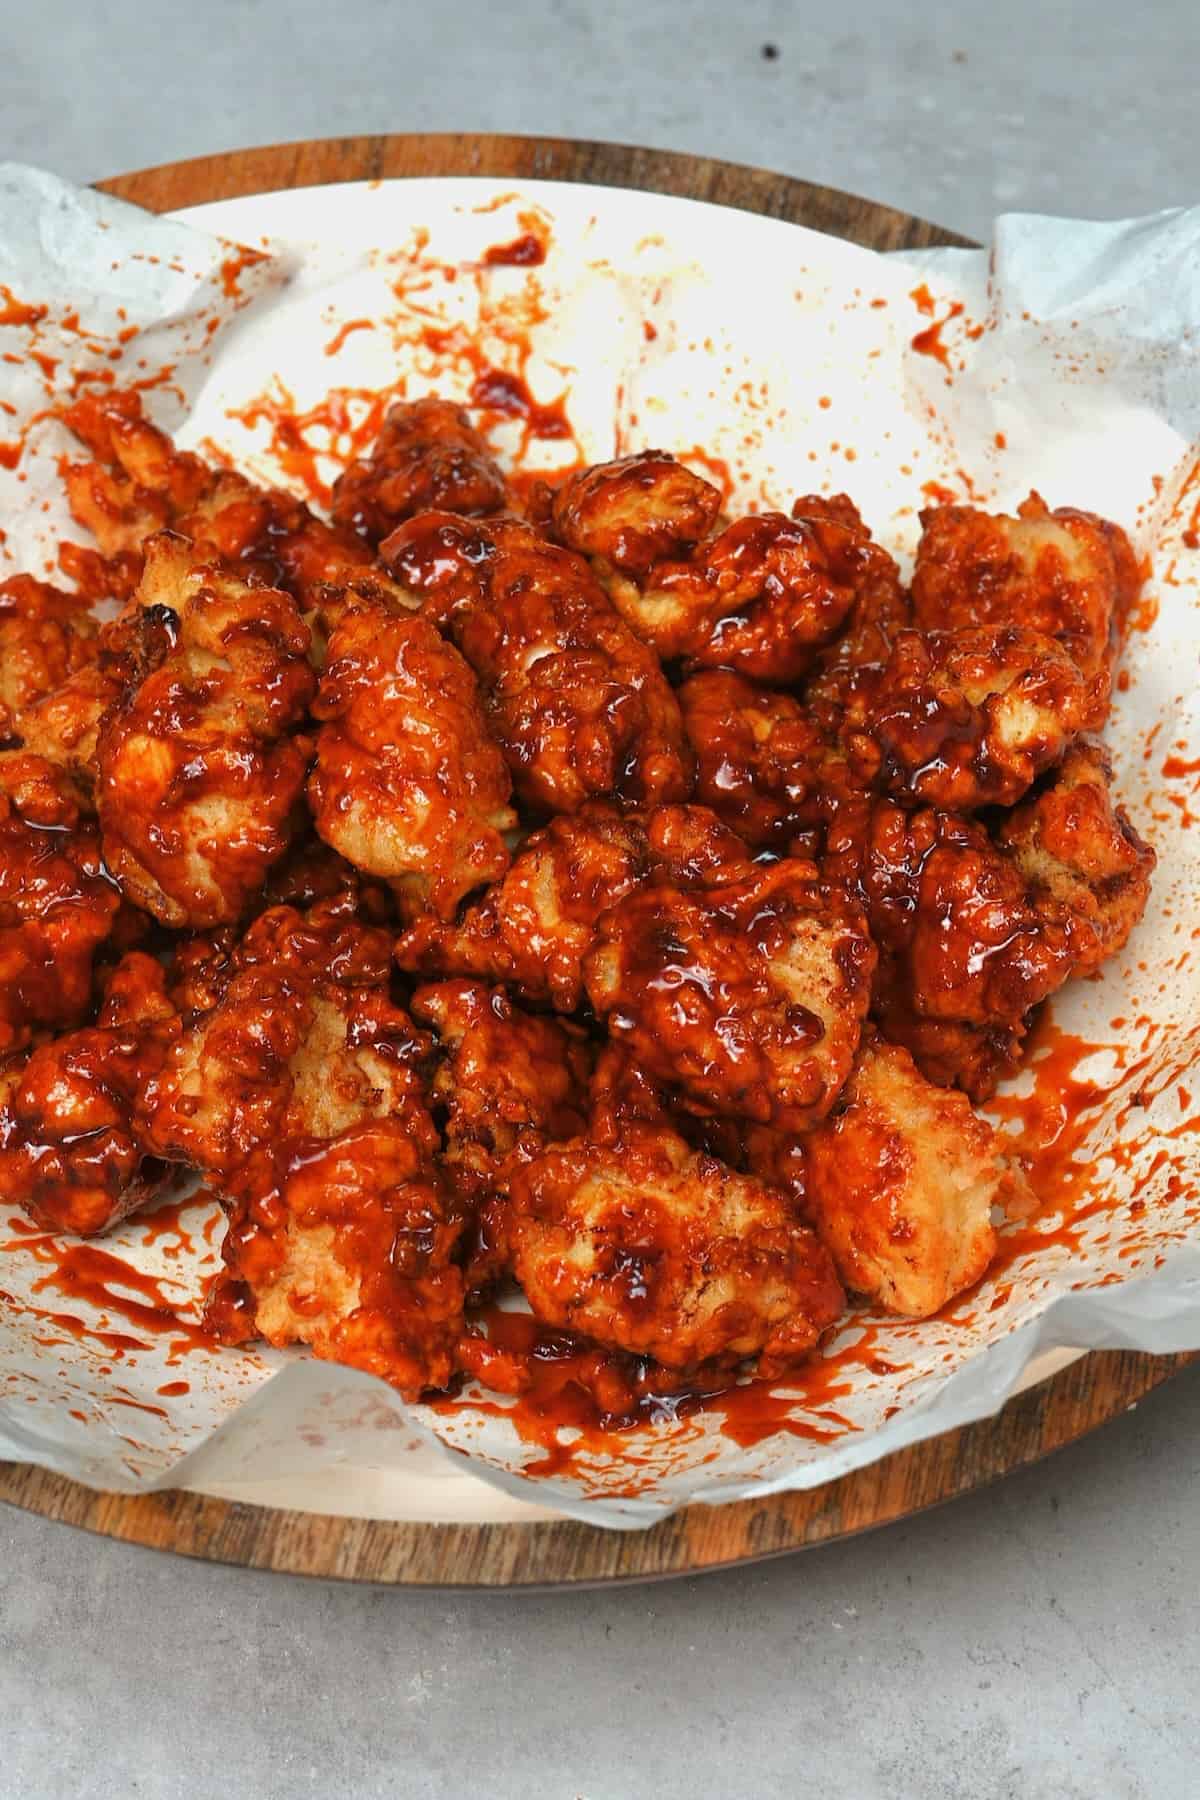 Fried chicken covered with red chili sauce